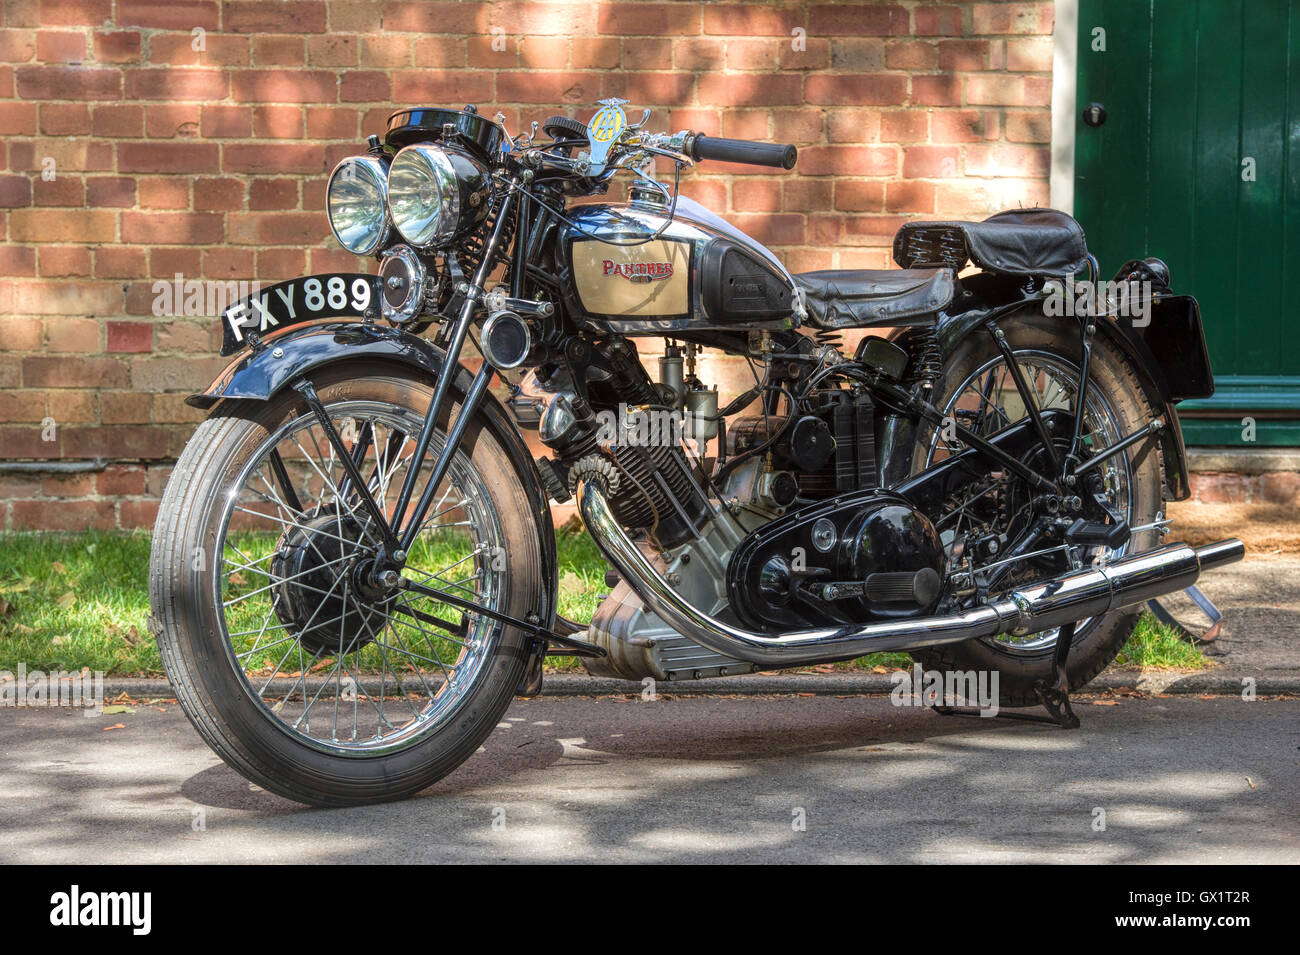 Panther Motorcycle High Resolution Stock Photography and Images - Alamy